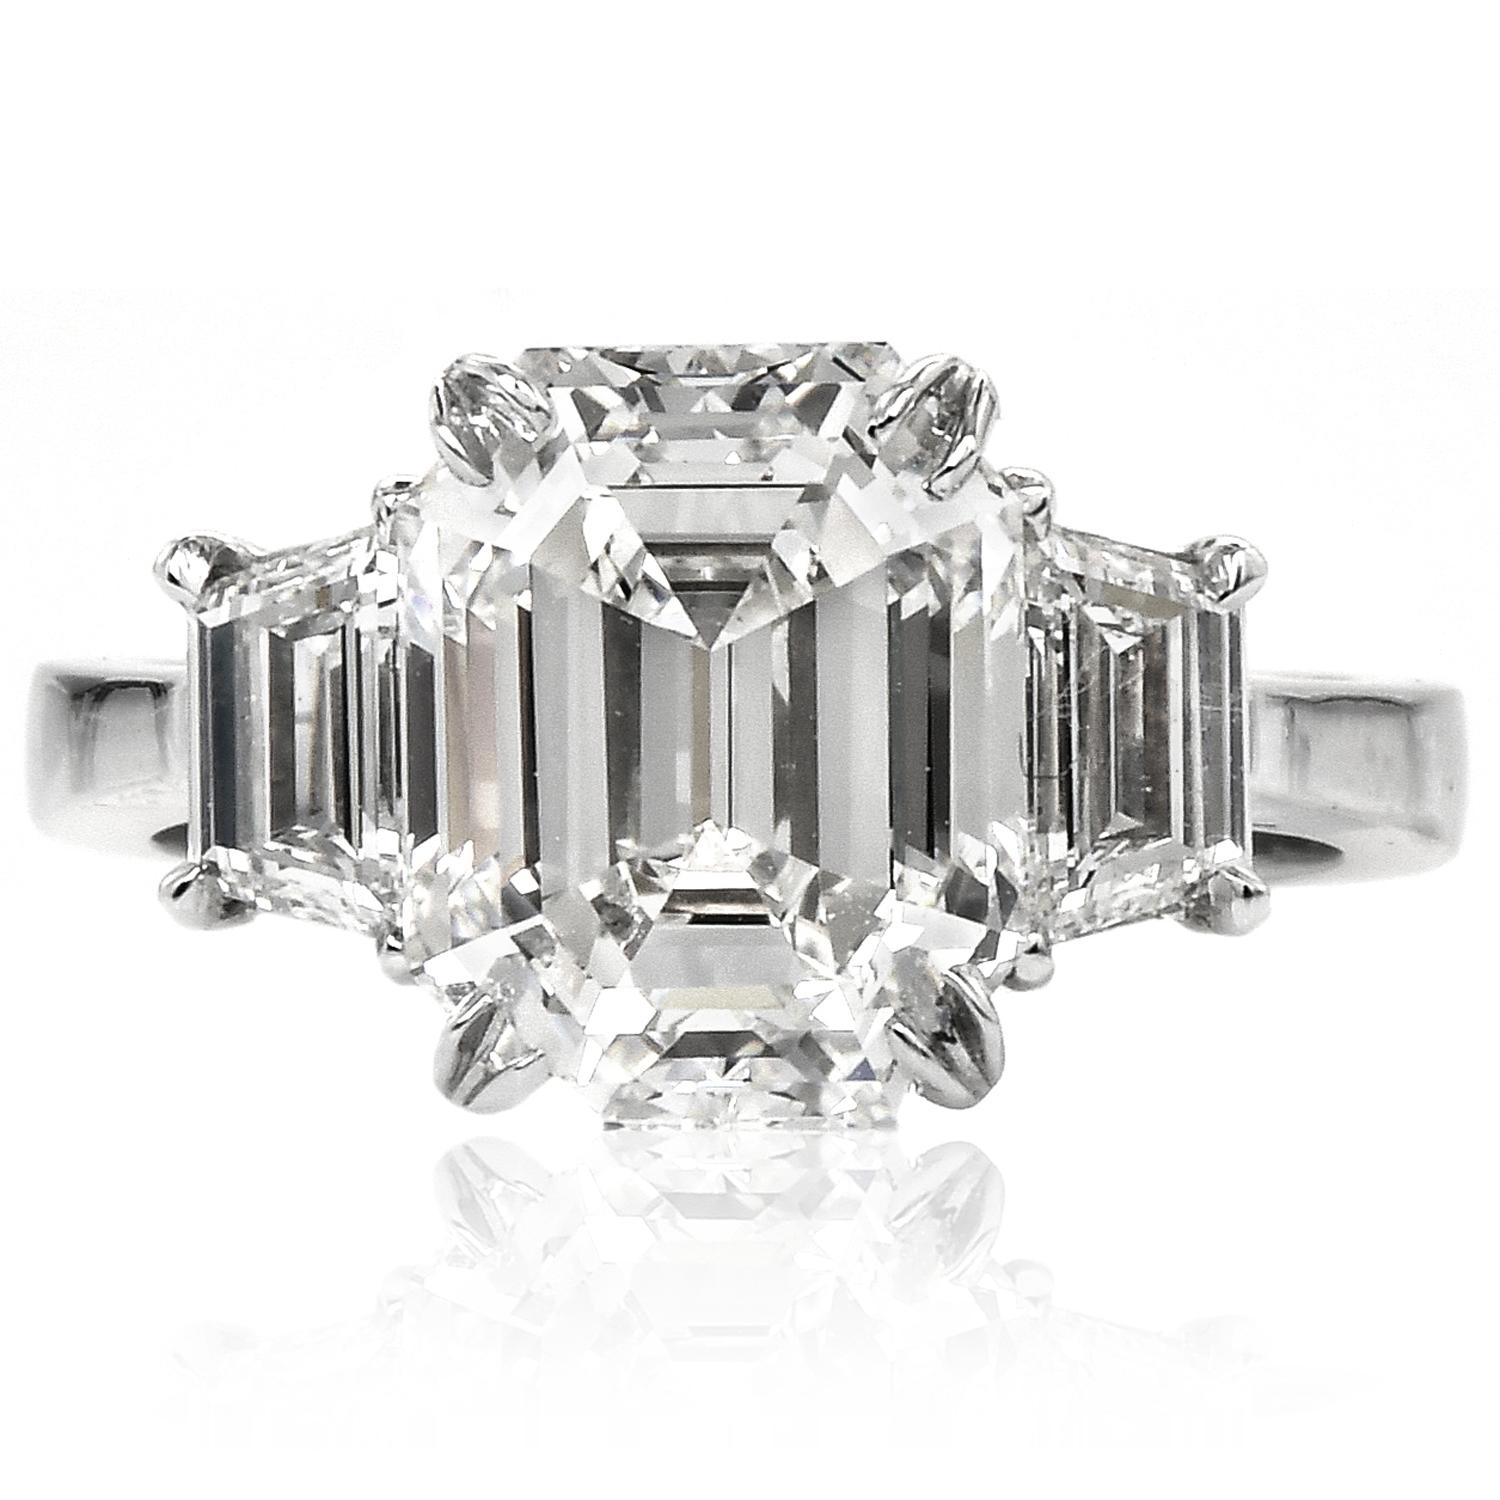 This exquisite diamond engagement ring is handcrafted in platinum. The center showcases one emerald cut diamond weighing 4.57 carats, graded I color, and VVS2 clarity. Shoulders are set with one diamond trapezoid graded H-I  color, VS clarity